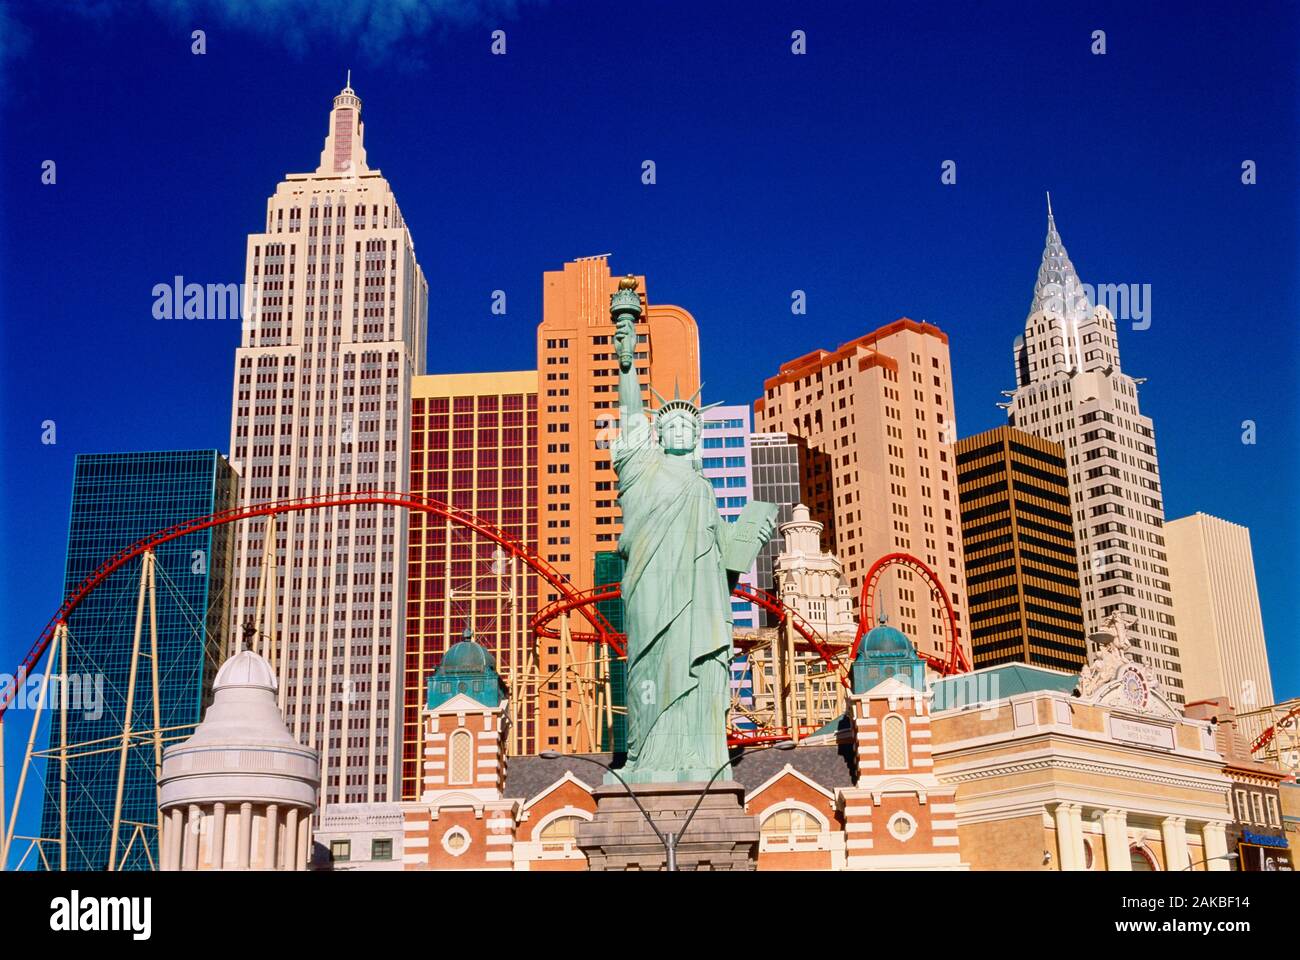 New York New York In Las Vegas At Night Stock Photo, Picture and Royalty  Free Image. Image 13021108.